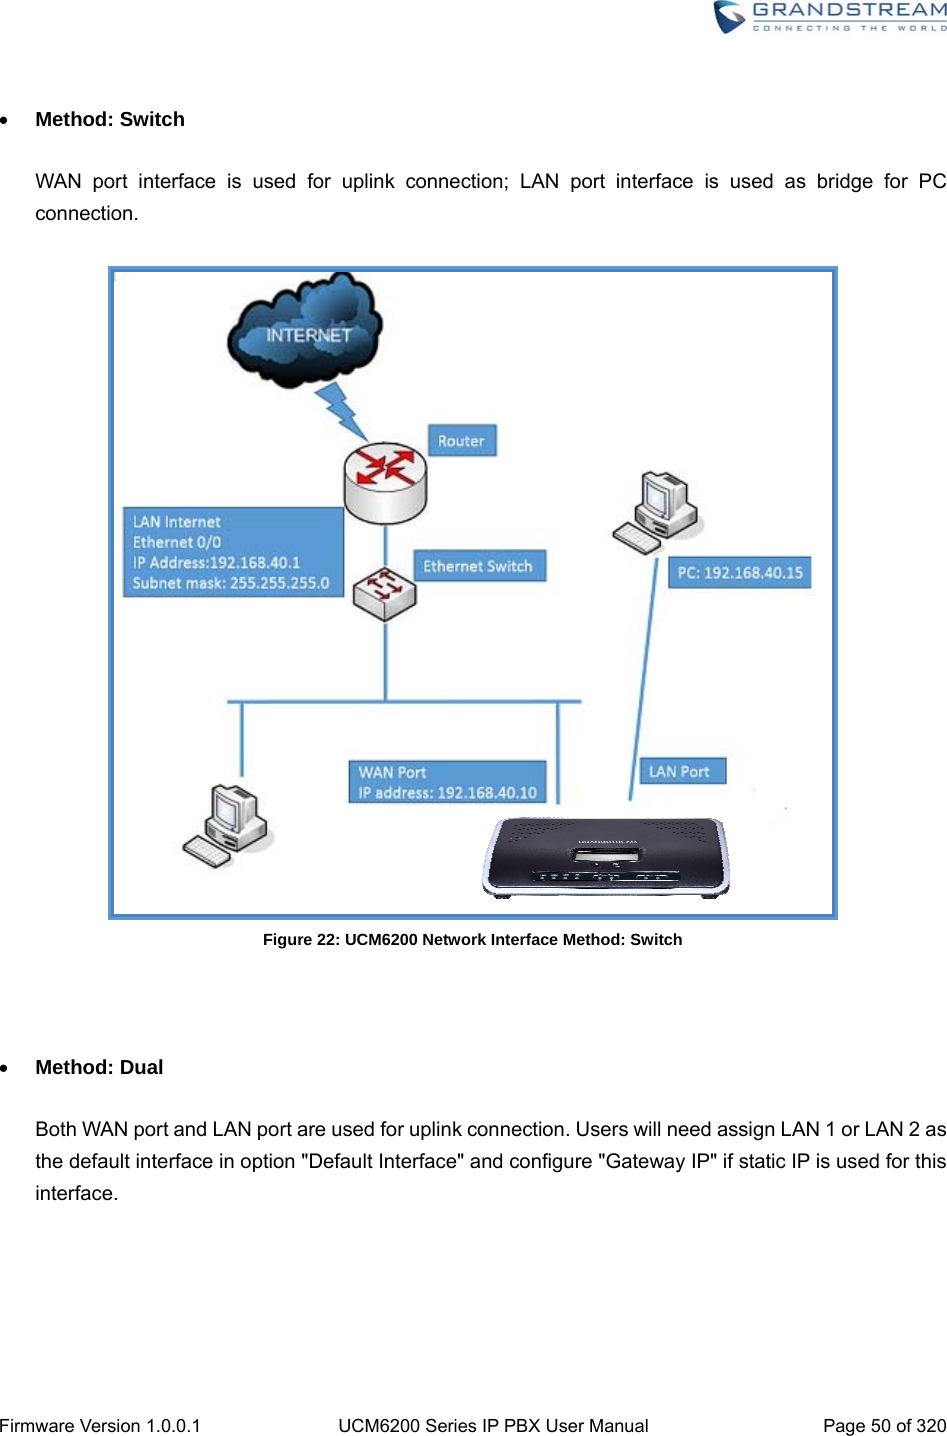  Firmware Version 1.0.0.1  UCM6200 Series IP PBX User Manual  Page 50 of 320   Method: Switch  WAN port interface is used for uplink connection; LAN port interface is used as bridge for PC connection.   Figure 22: UCM6200 Network Interface Method: Switch     Method: Dual  Both WAN port and LAN port are used for uplink connection. Users will need assign LAN 1 or LAN 2 as the default interface in option &quot;Default Interface&quot; and configure &quot;Gateway IP&quot; if static IP is used for this interface.  